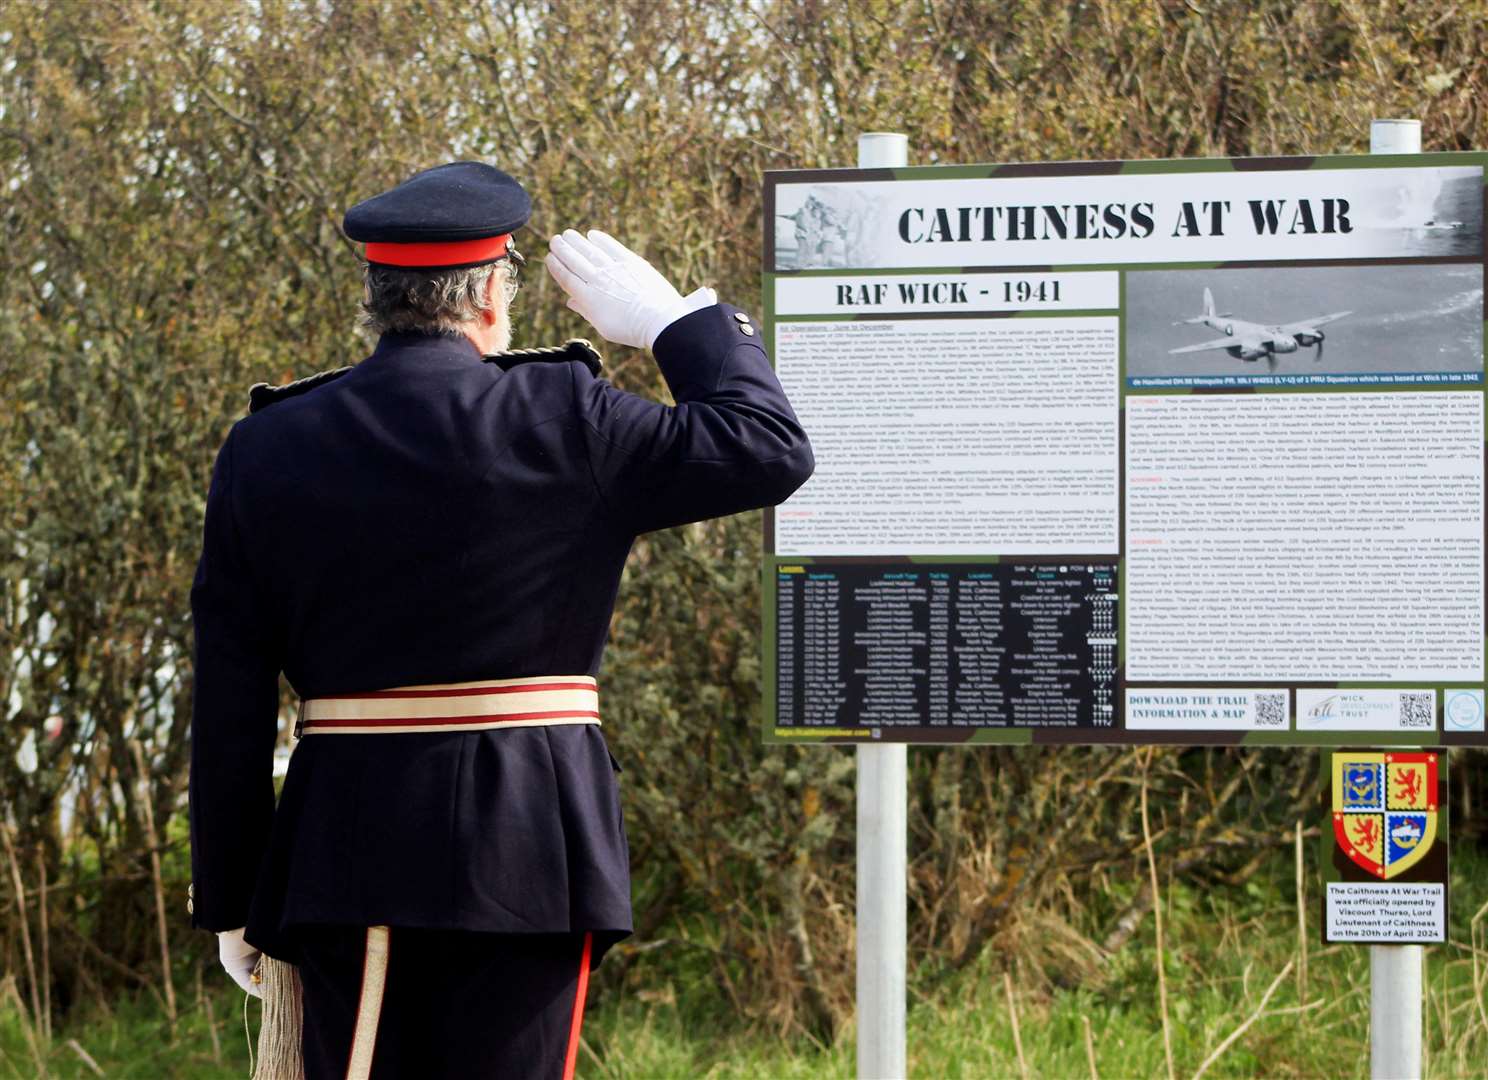 Lord Thurso, Lord-Lieutenant of Caithness, gives a salute after he officially opened the Caithness At War heritage trail. Picture: Alan Hendry